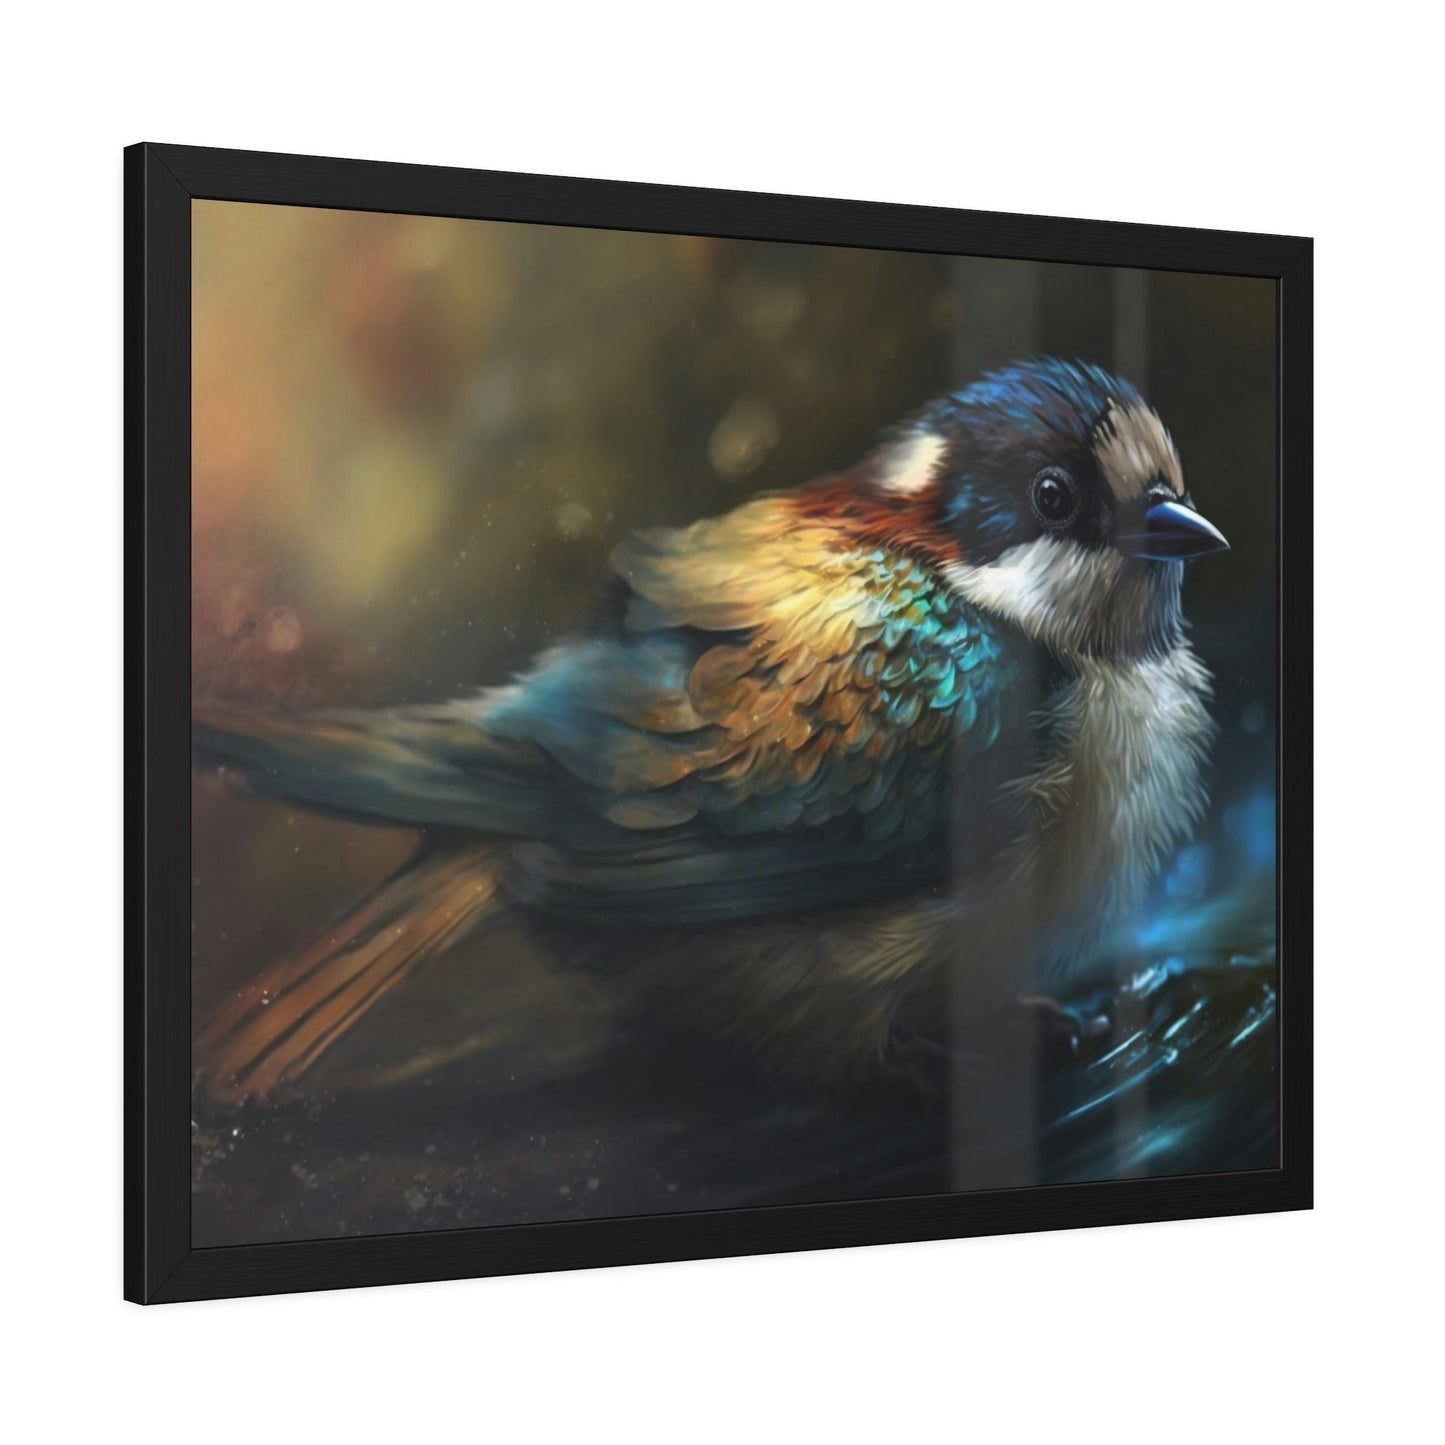 The Secret Life of Birds: A Natural Canvas & Poster of Birds in Their Habitat